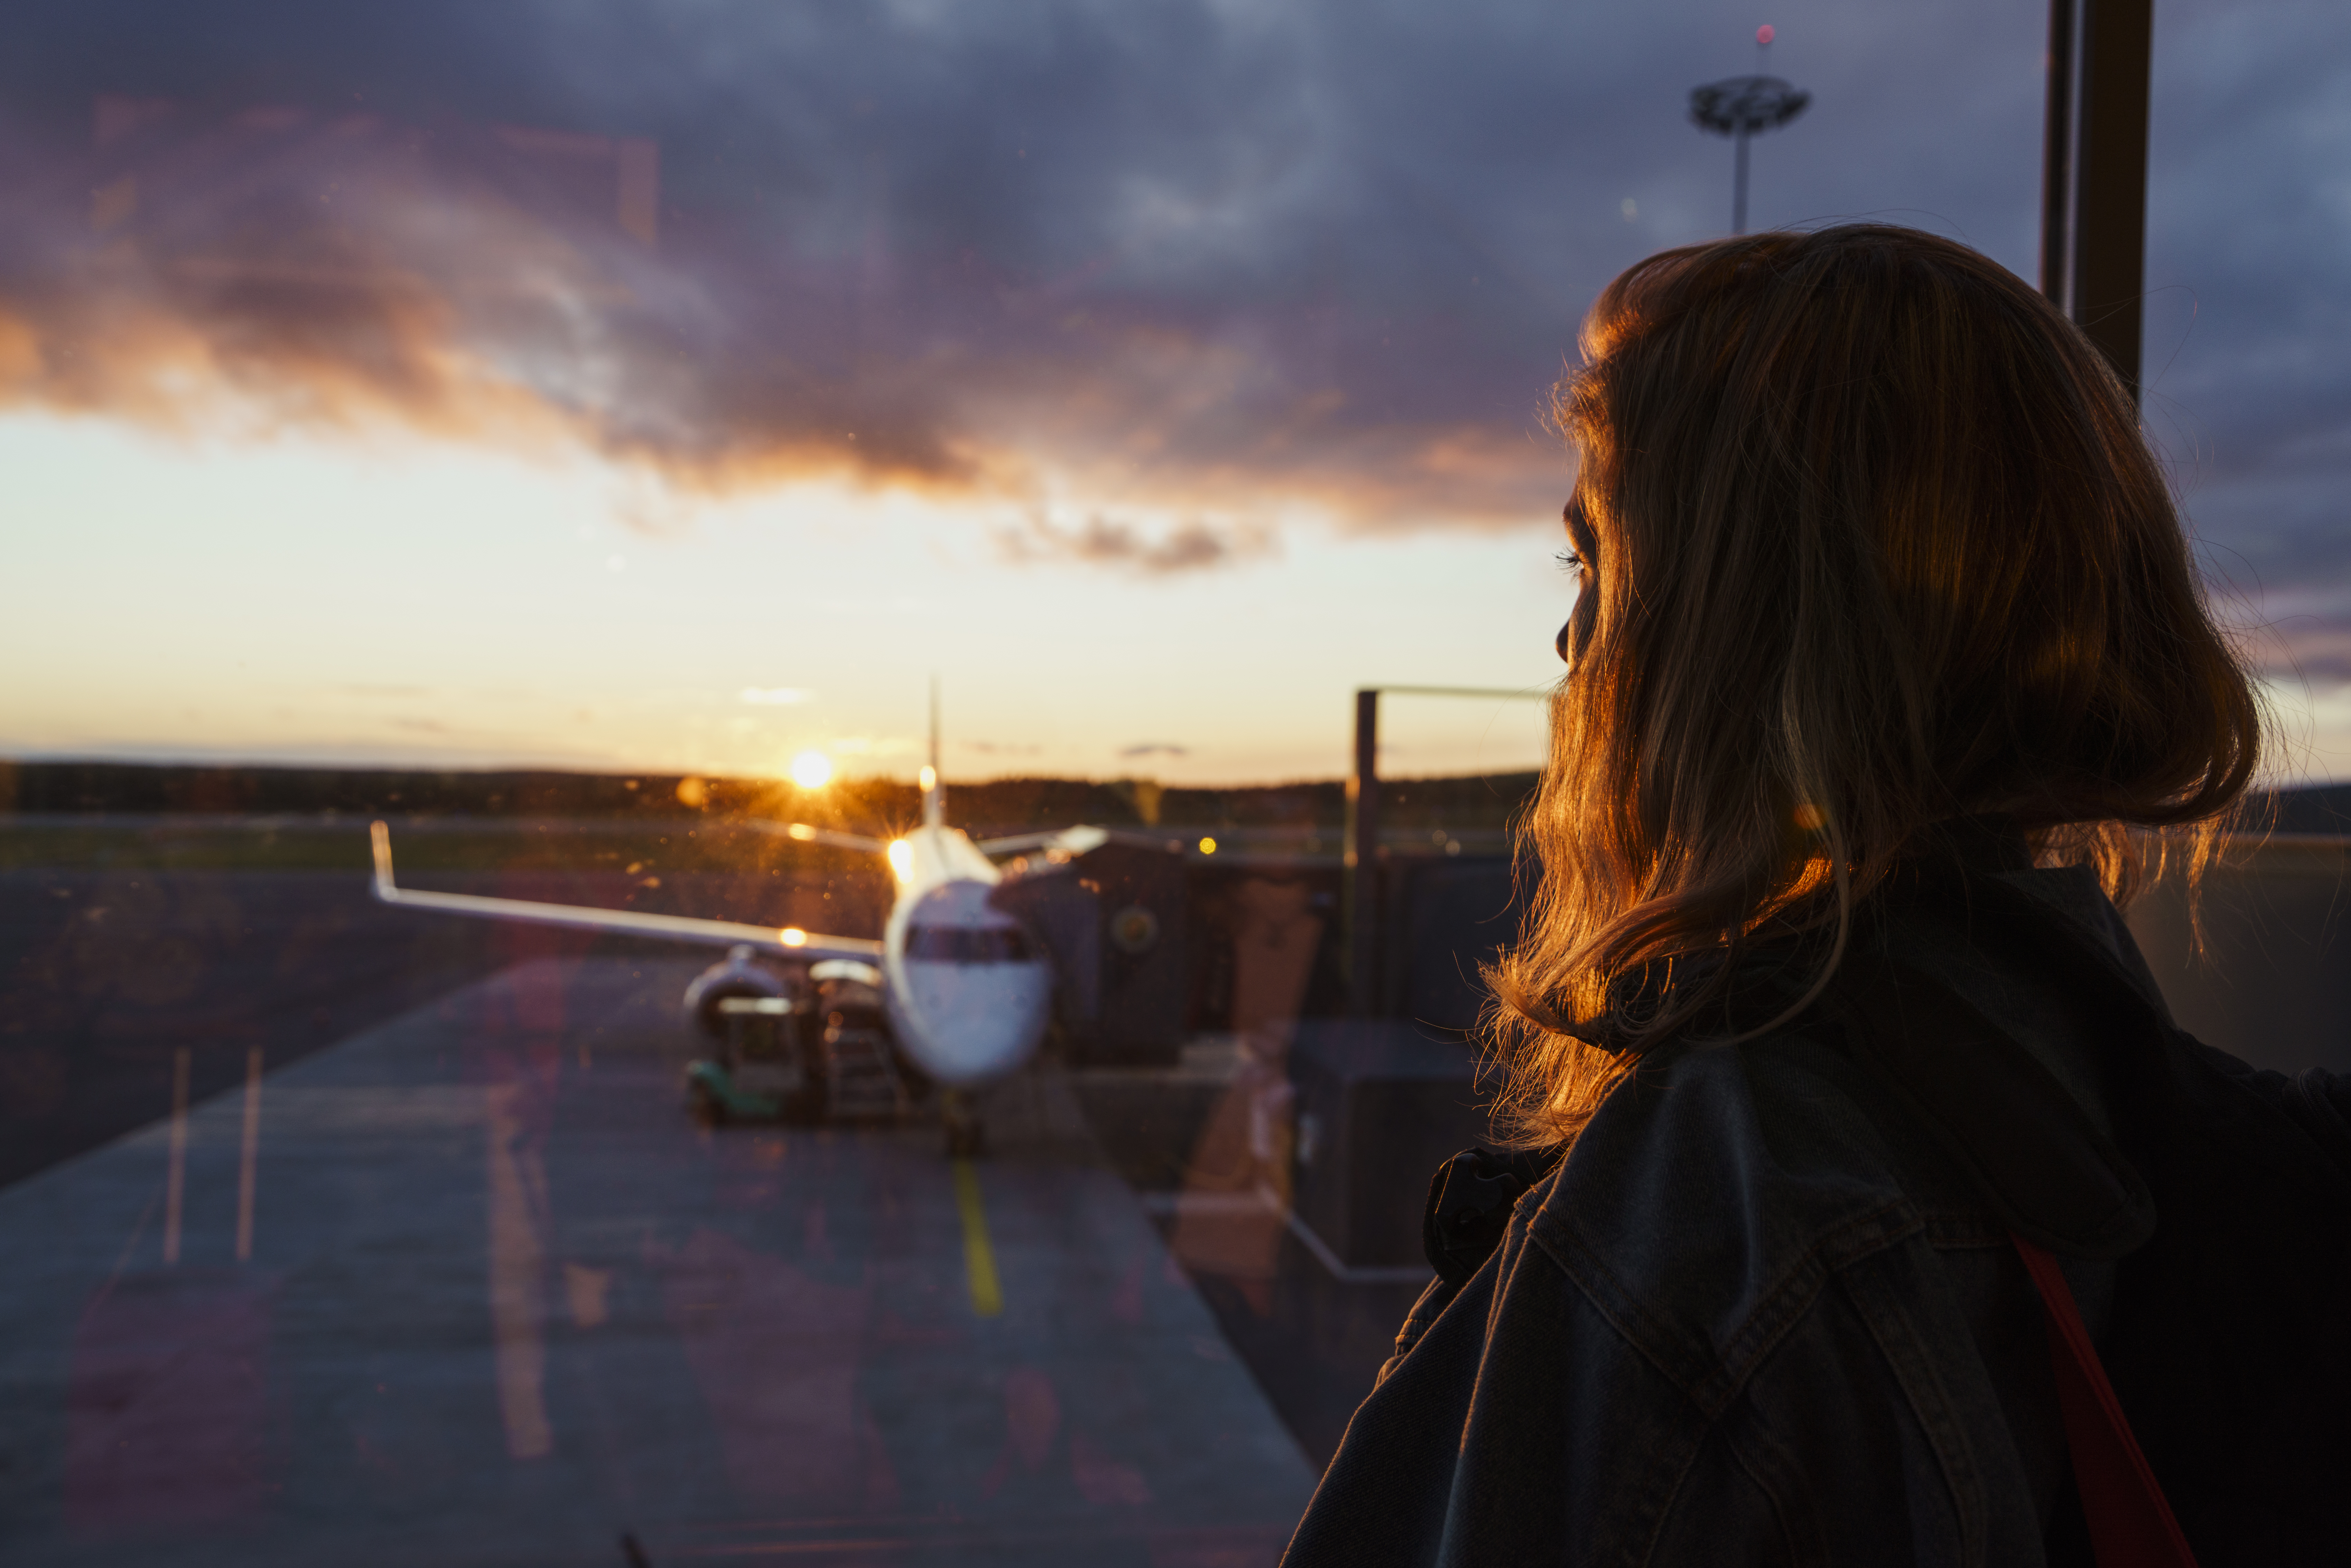 Young woman looking through window on plane at the airport at sunset | Source: Getty Images